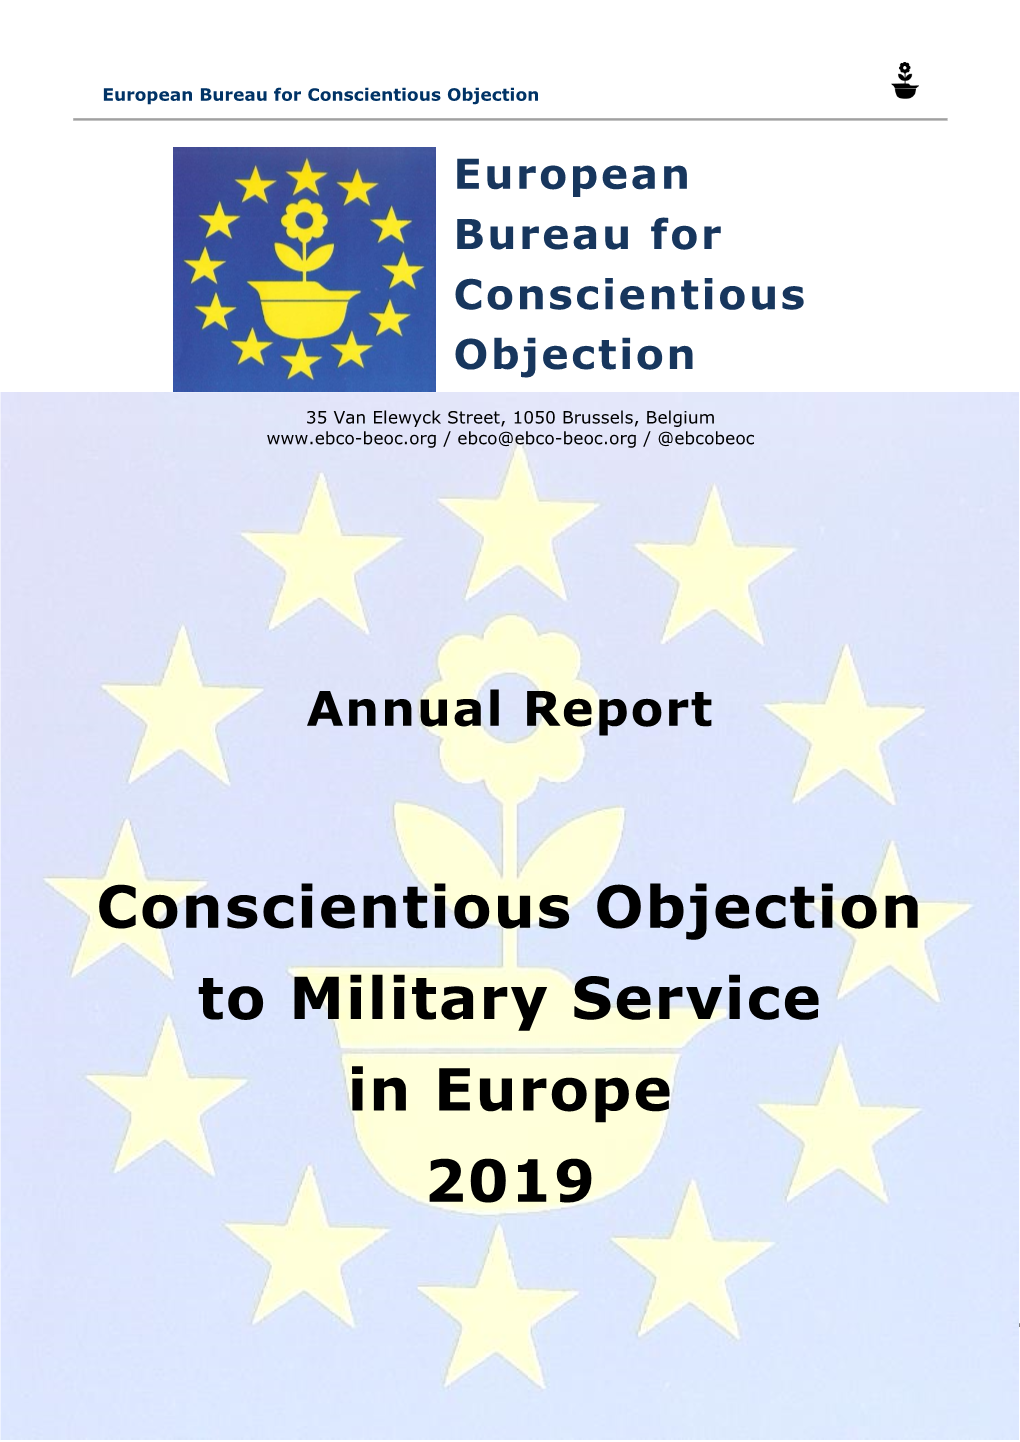 Annual Report on Conscientious Objection to Military Service In